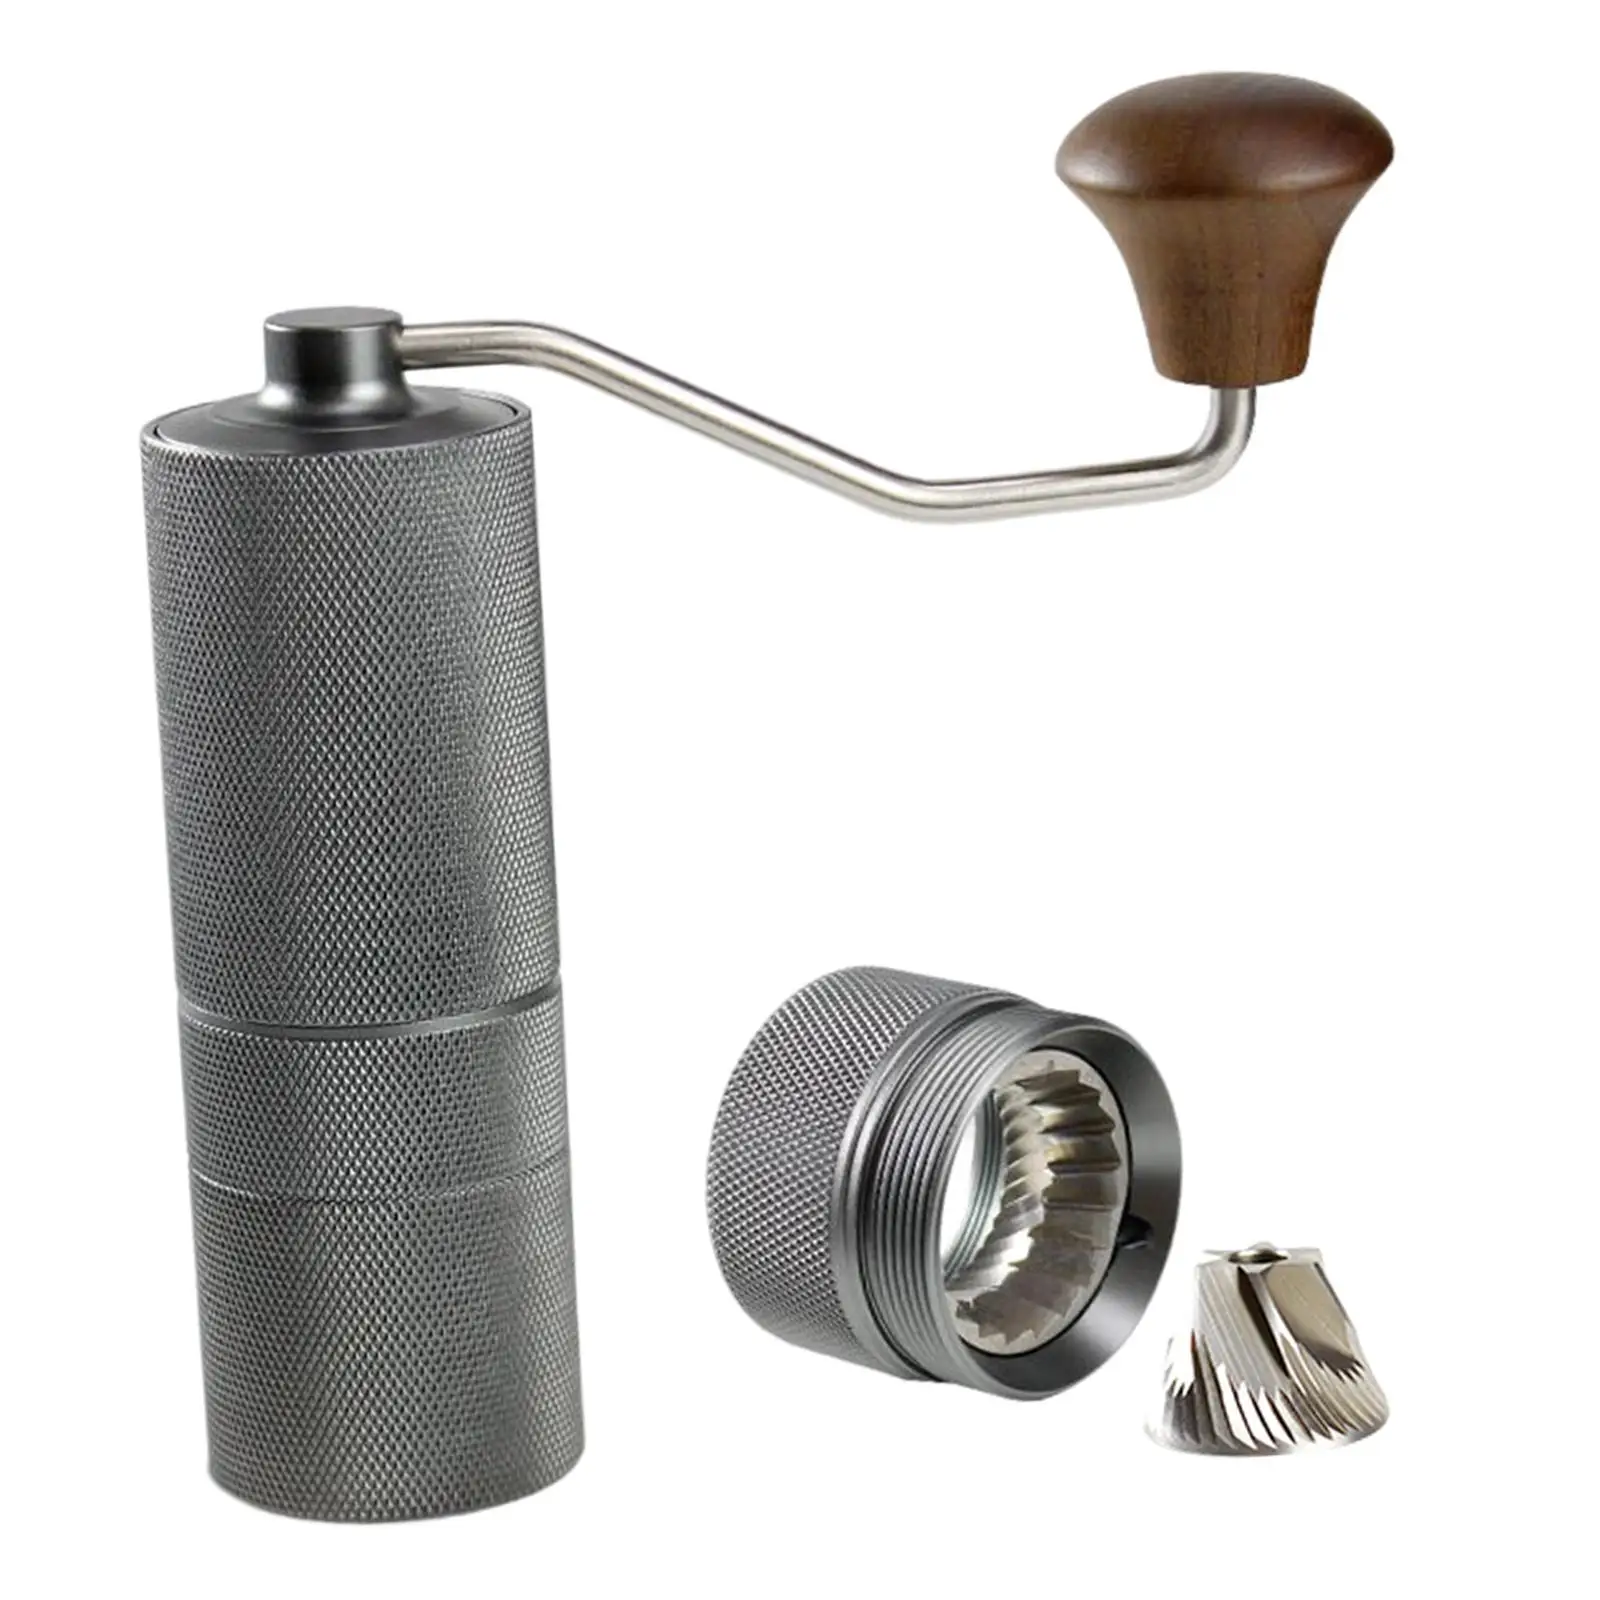 Portable Hand Coffee Mill Hand Crank Coffee Mill Coffee Beans Mill Conical Burr Mill for Home Bar Office Kitchen Cafe